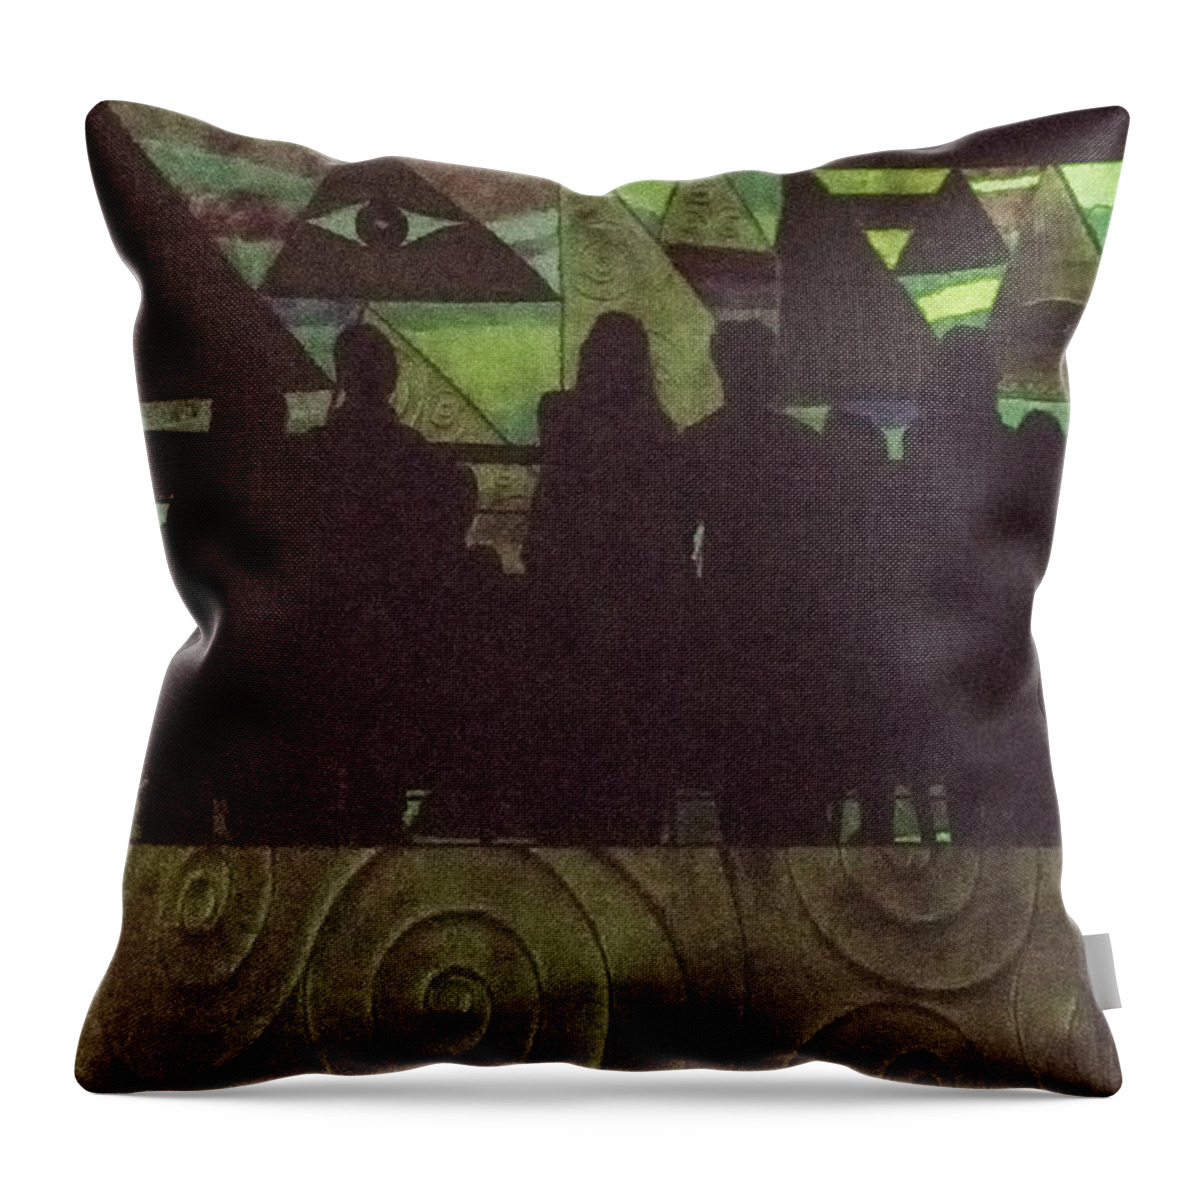 Projections Throw Pillow featuring the photograph The Voyage by Jessica Levant